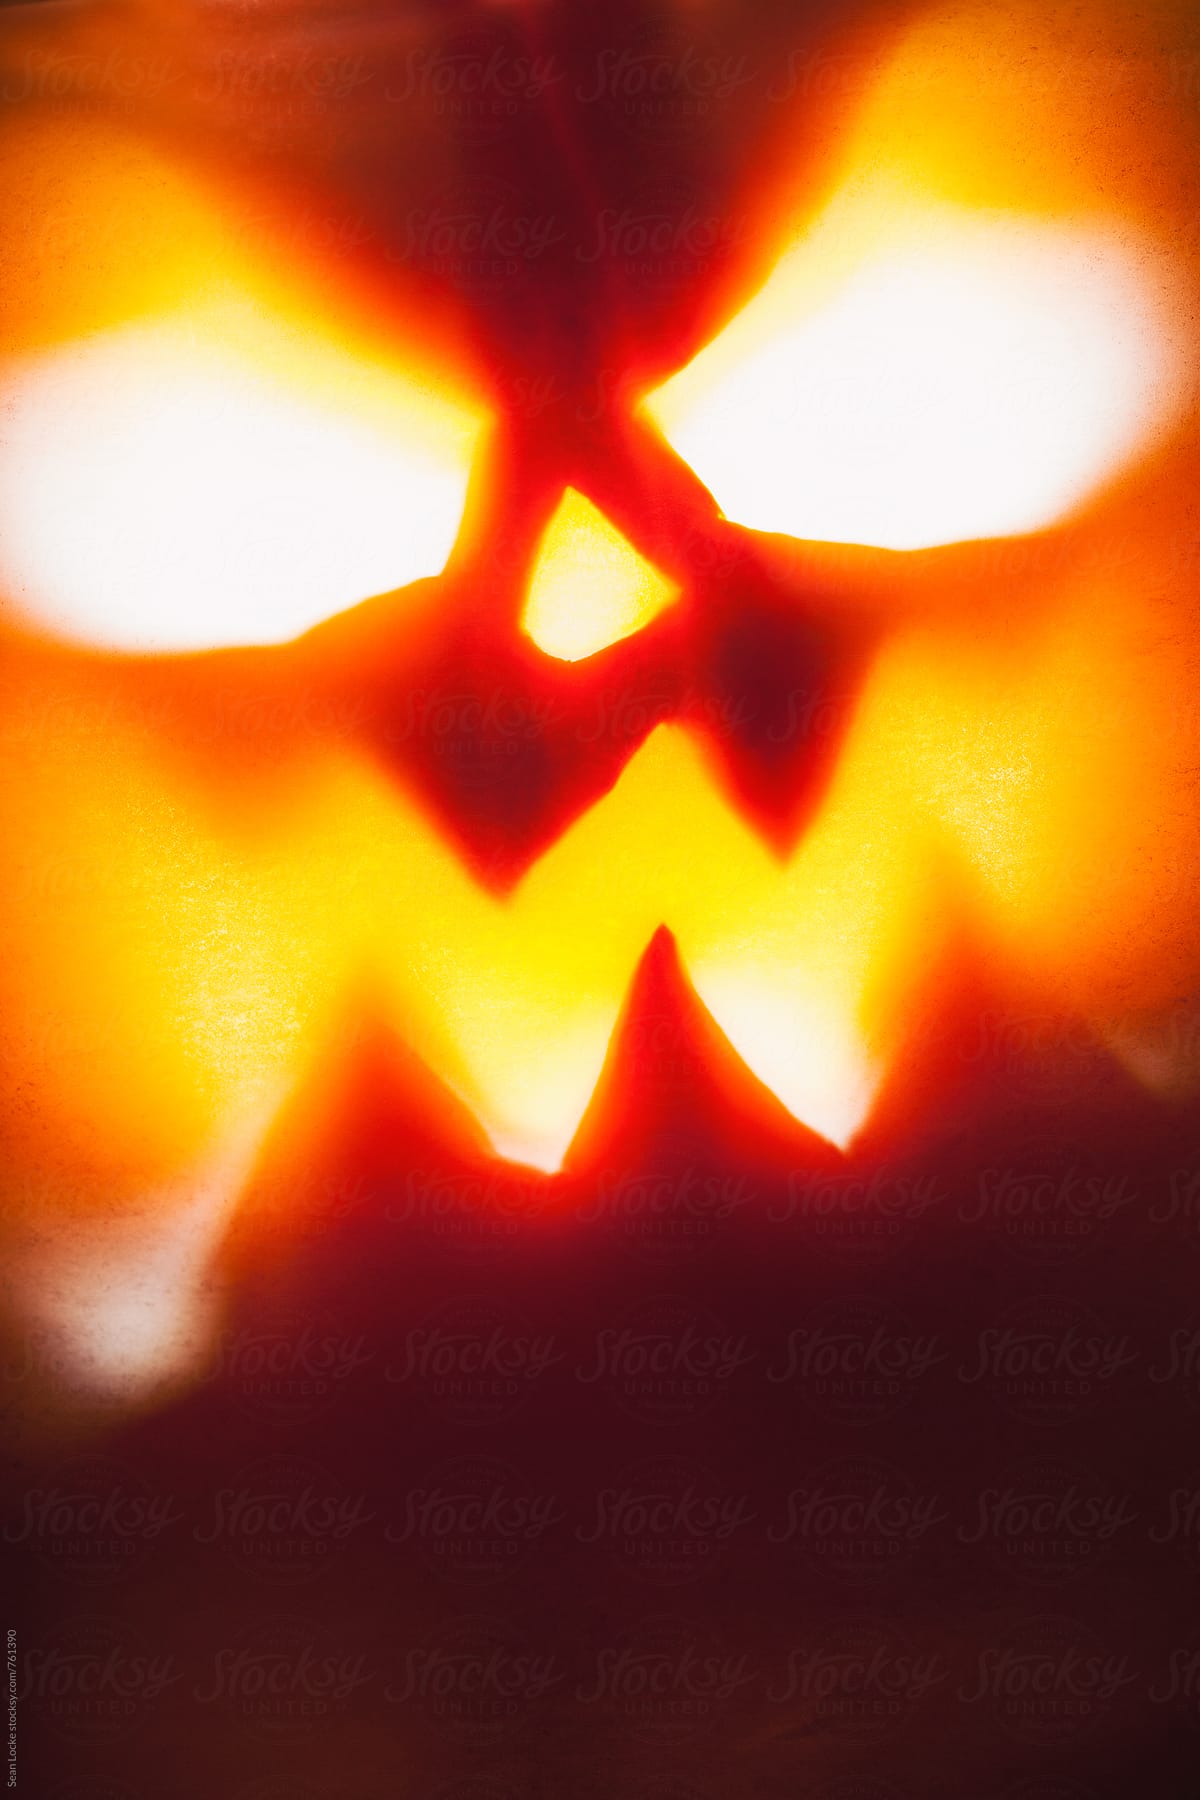 Halloween: Scary Jack-O-Lantern Face Glows With Evil